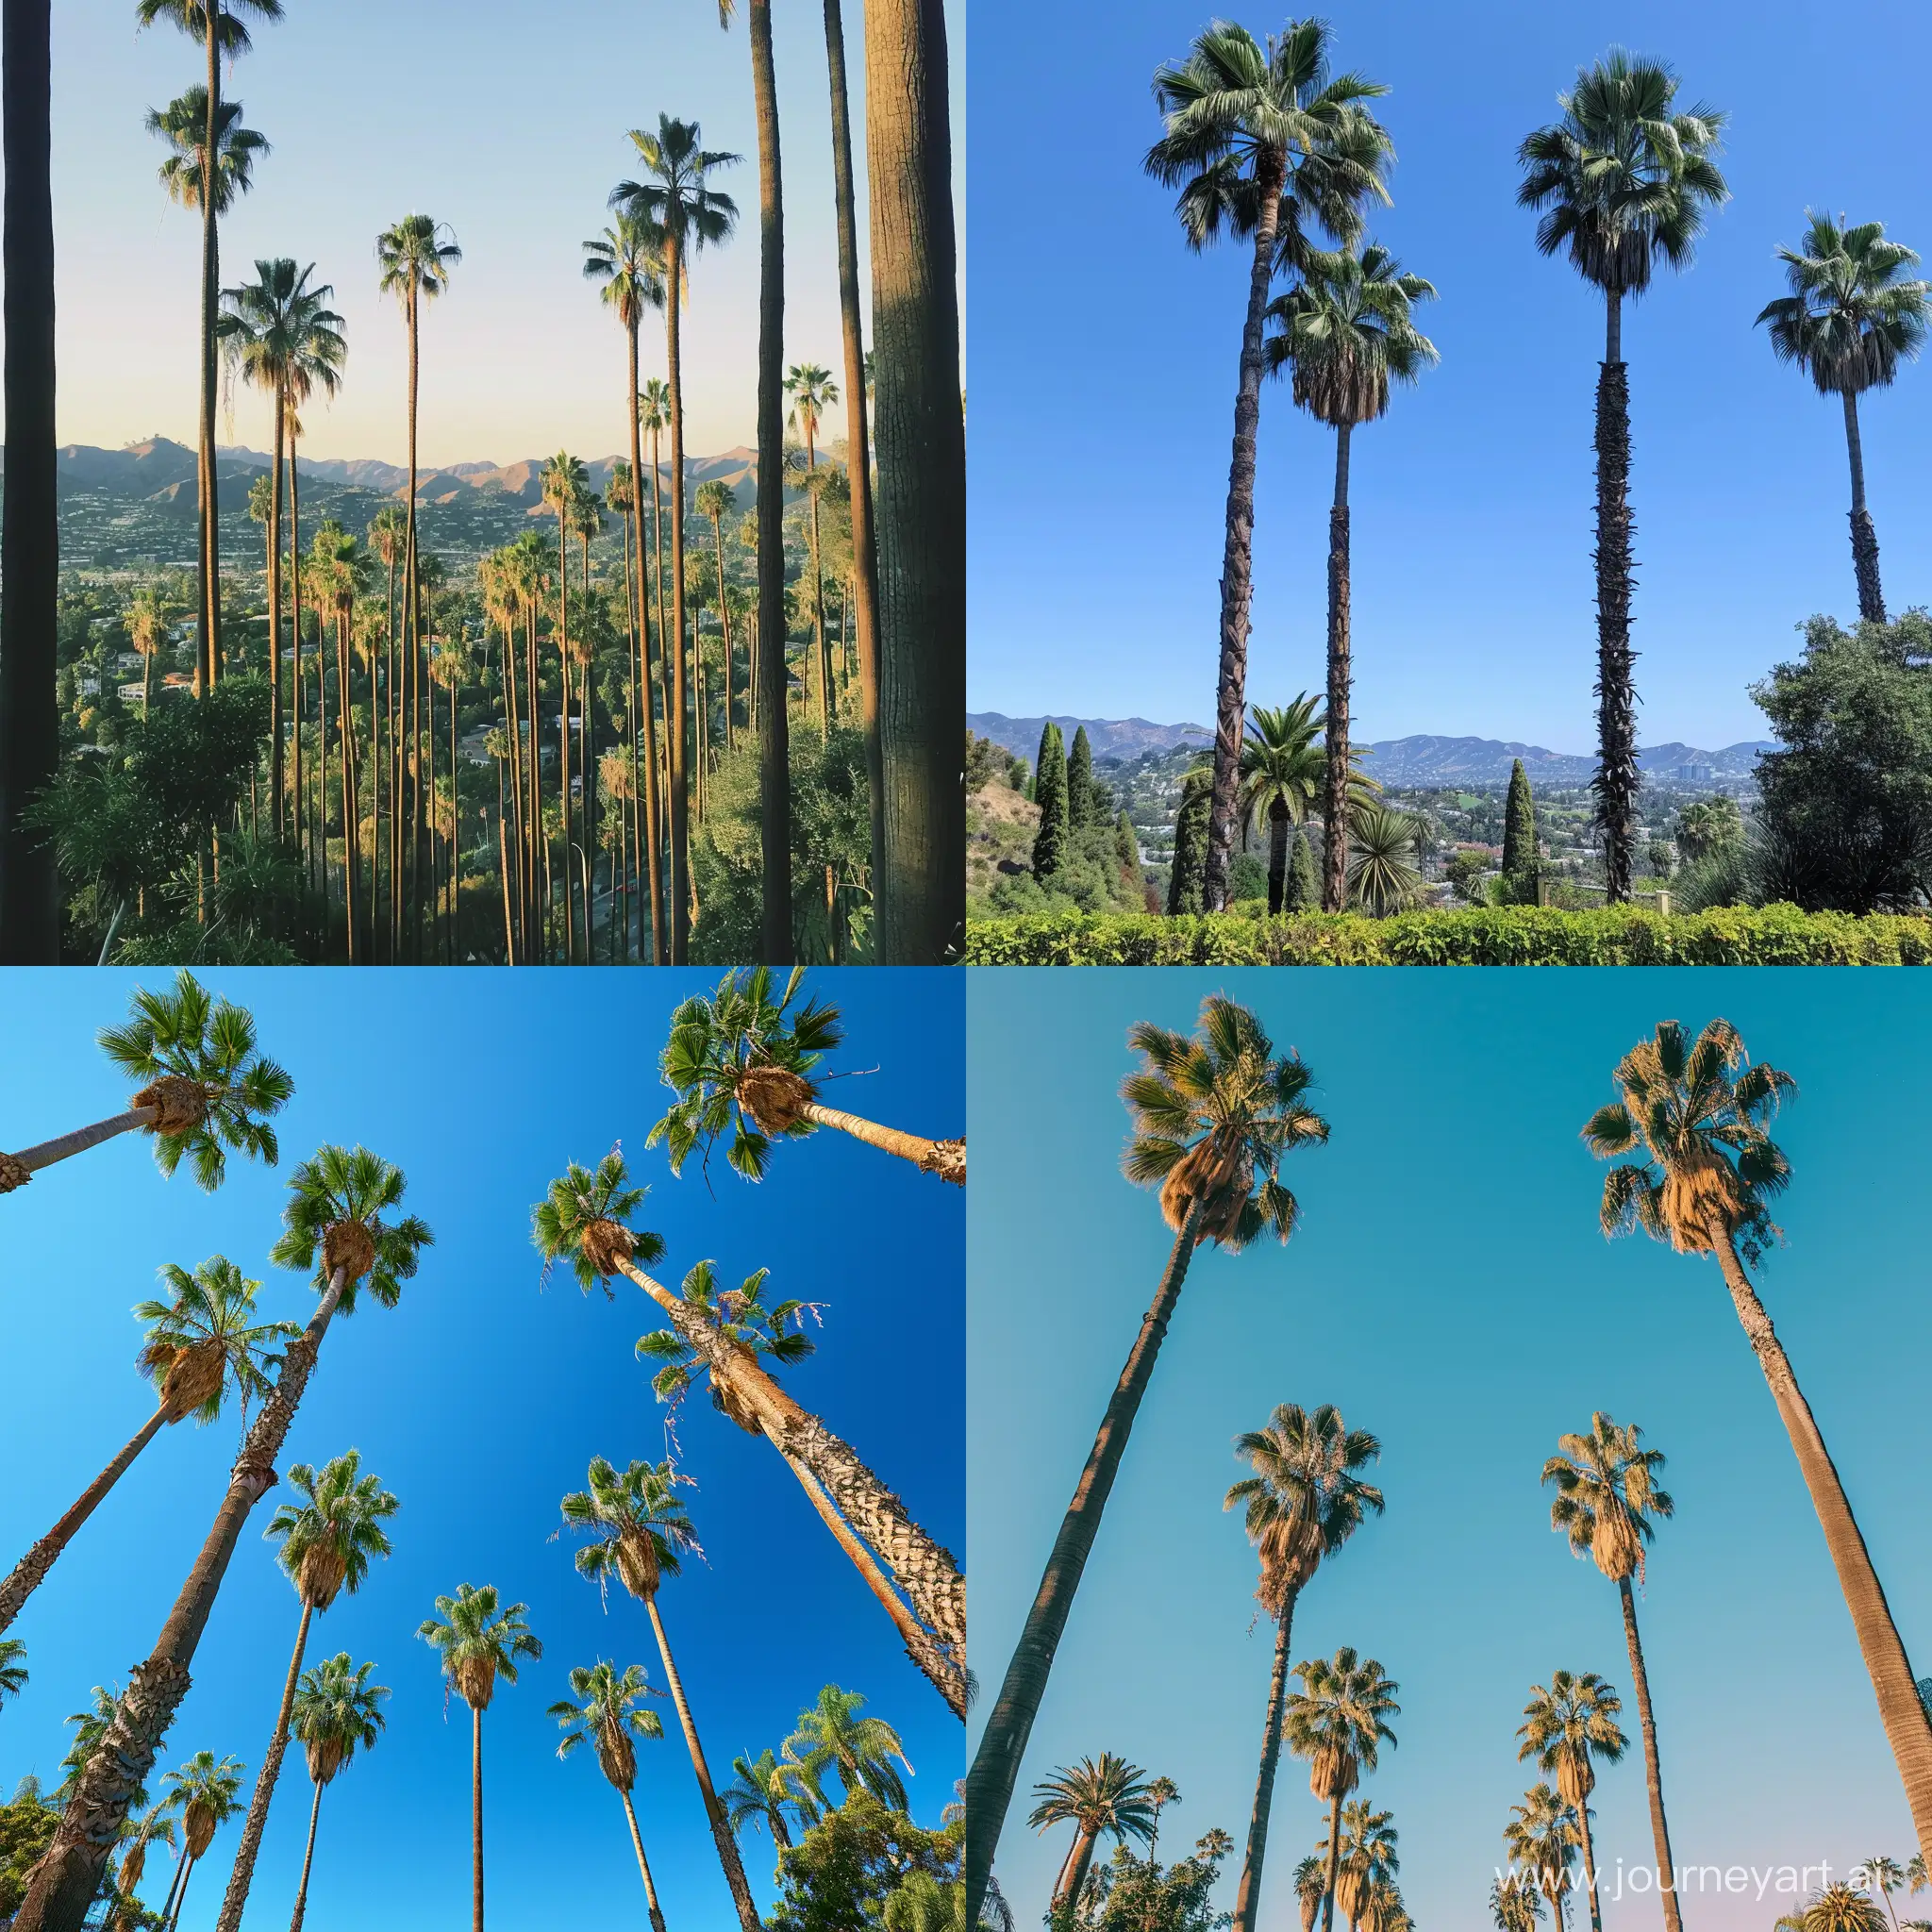 Beverly-Hills-Palm-Trees-Iconic-Californian-Scene